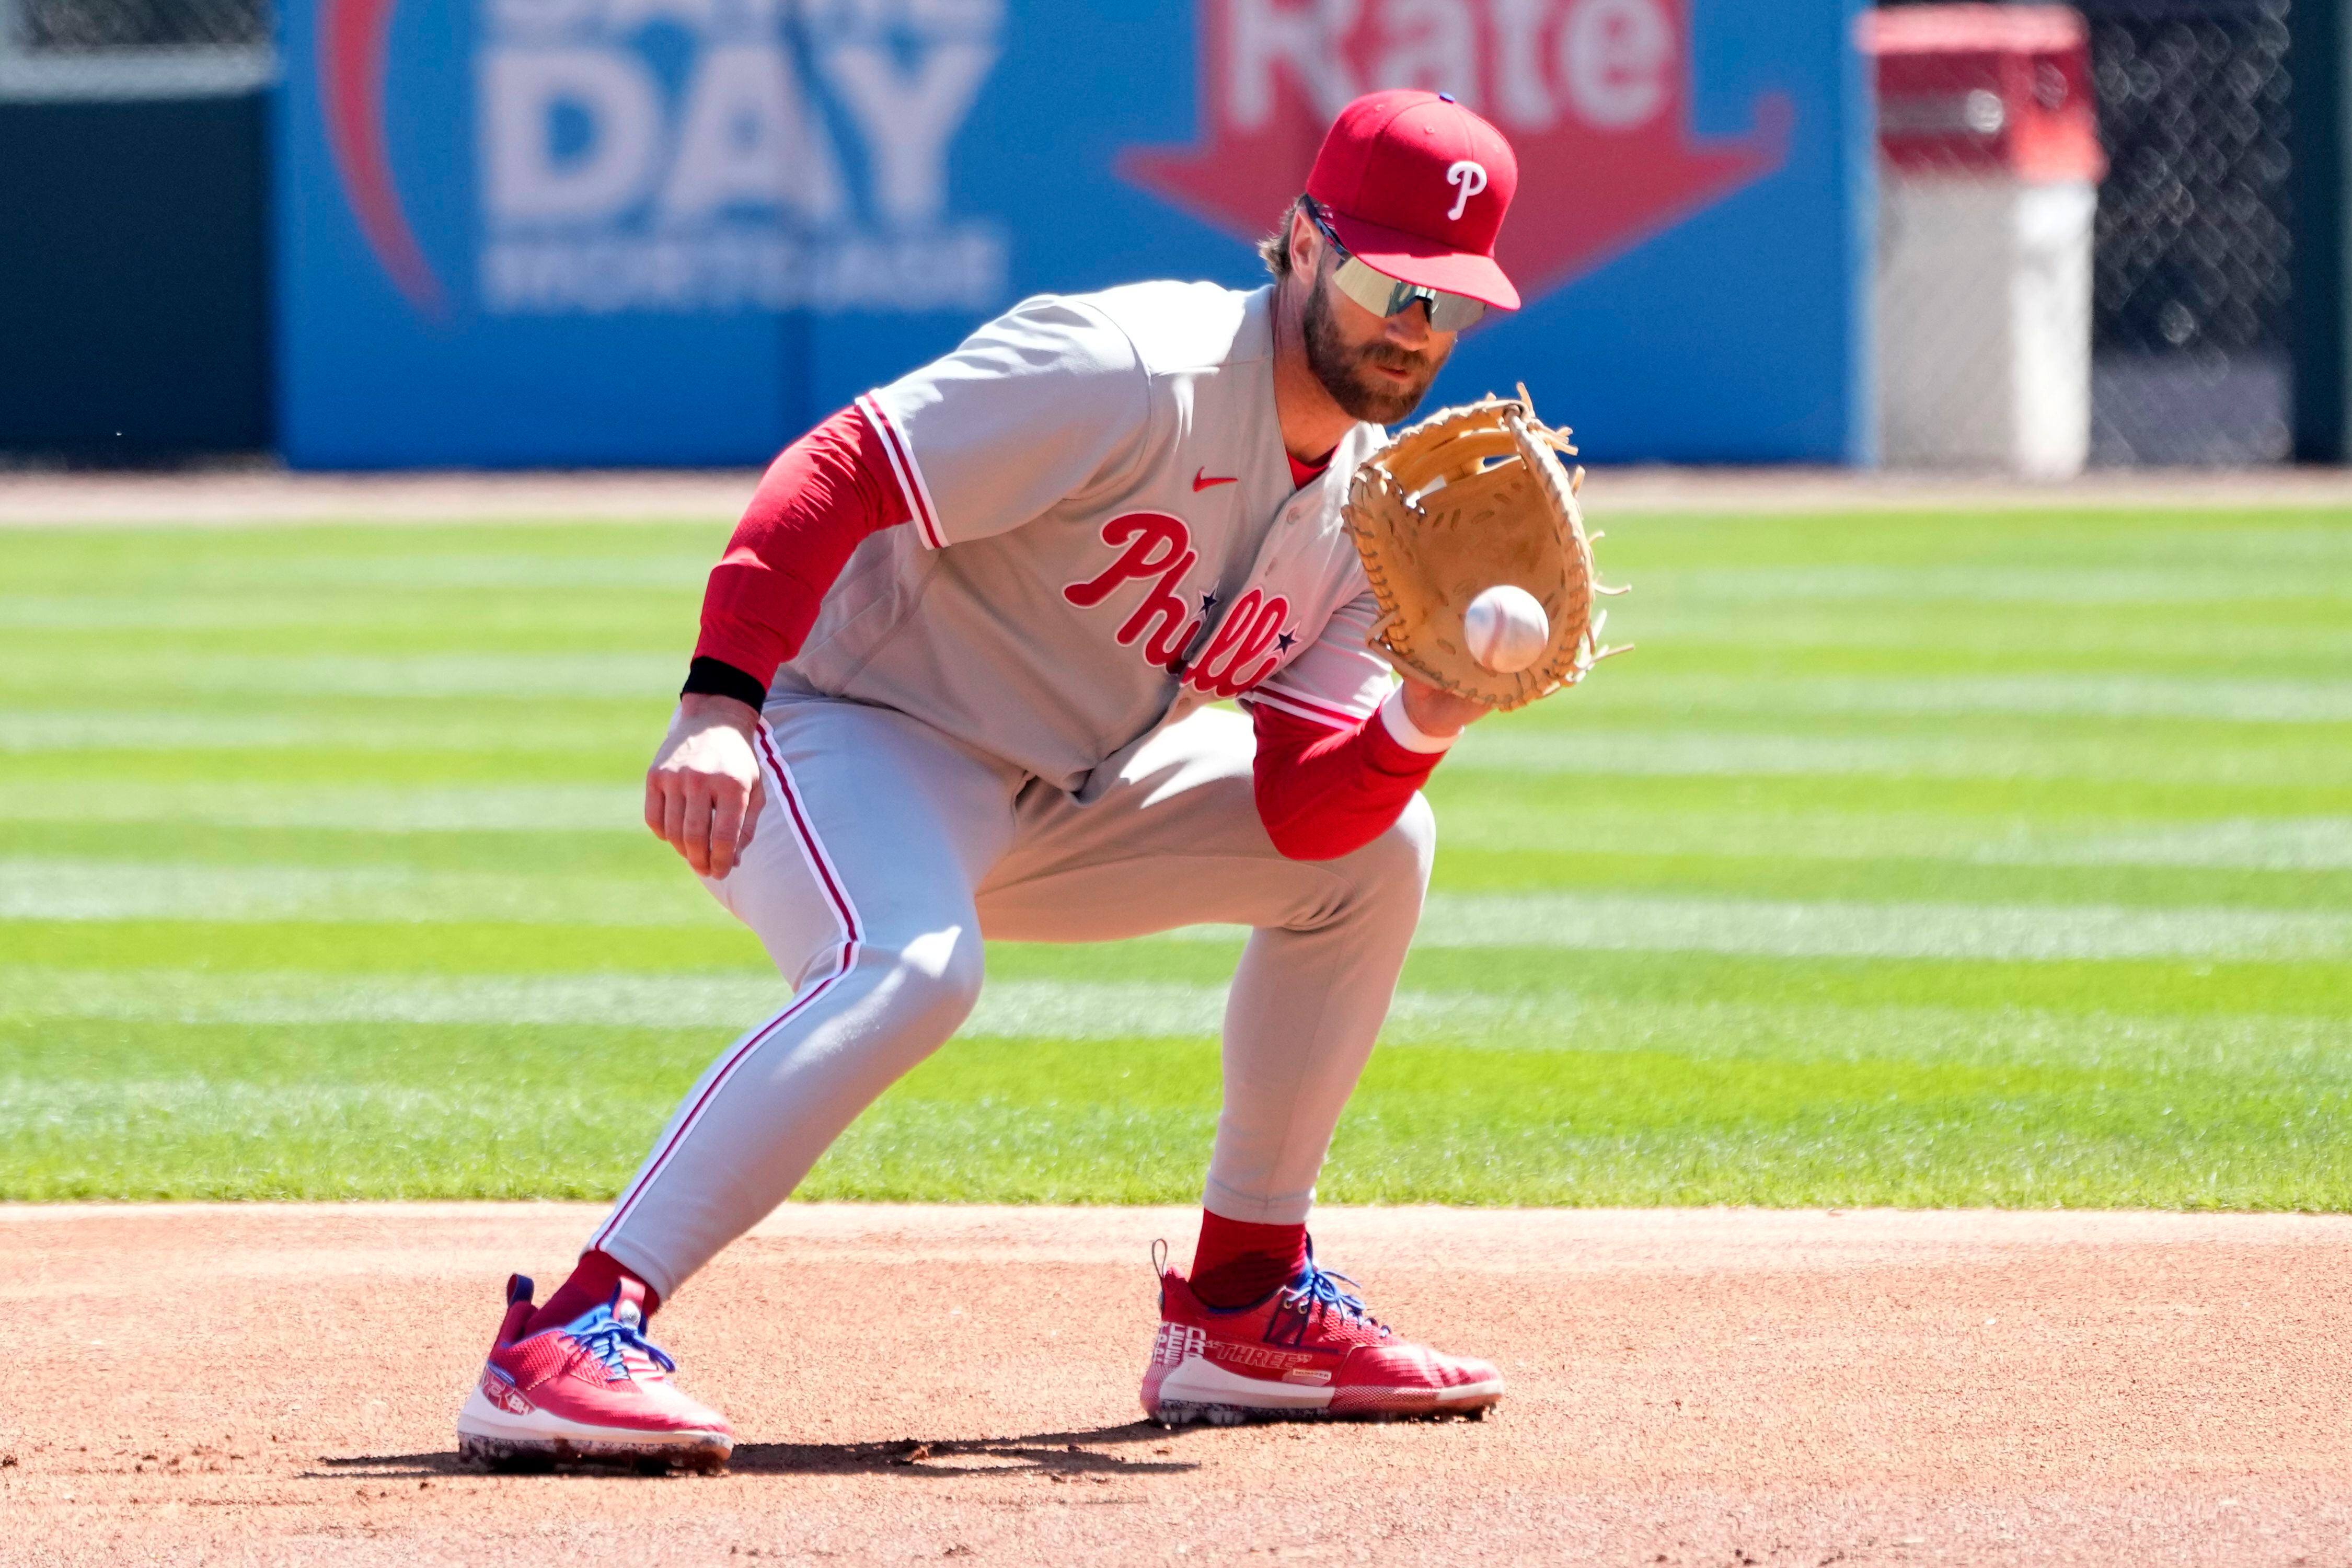 Phillies slide star Bryce Harper over to first base as team